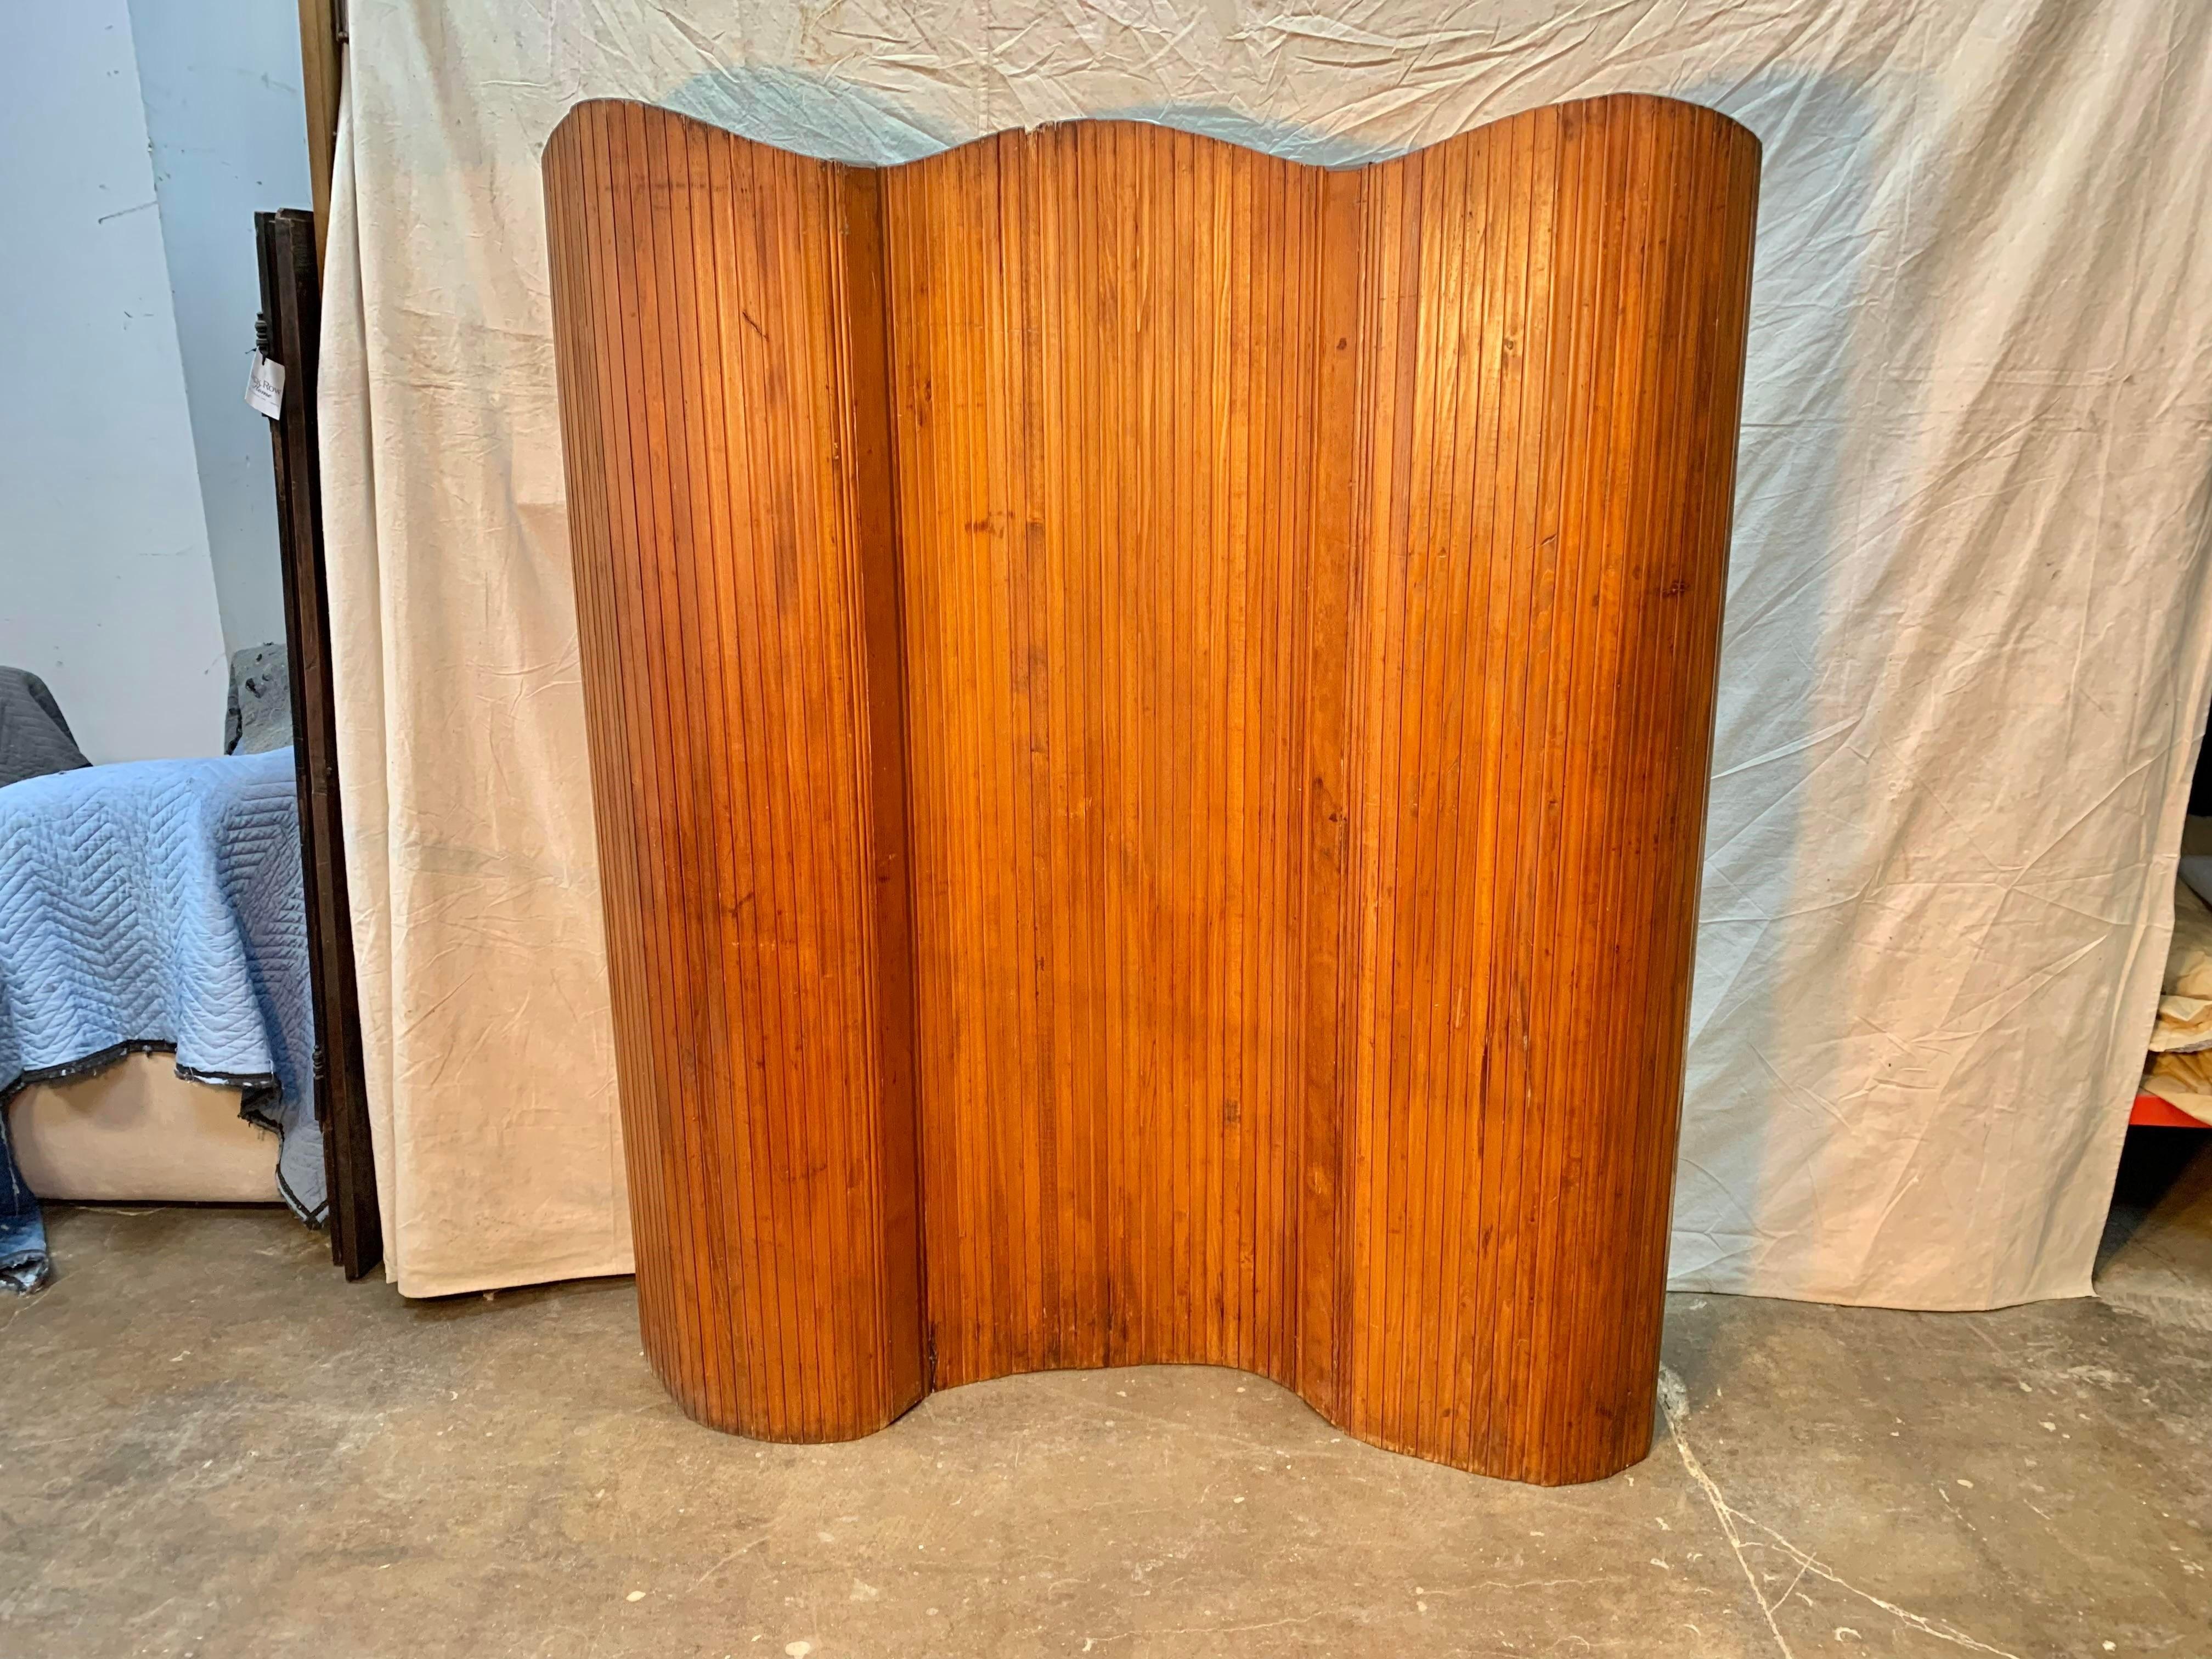 French Art Deco freestanding room divider / folding screen in patinated pine attributed to Jomain Baumann, 1940s. A flexible paravent made out of strips of wood allows the screen to stand freely or be folded, extended into different angles or rolled